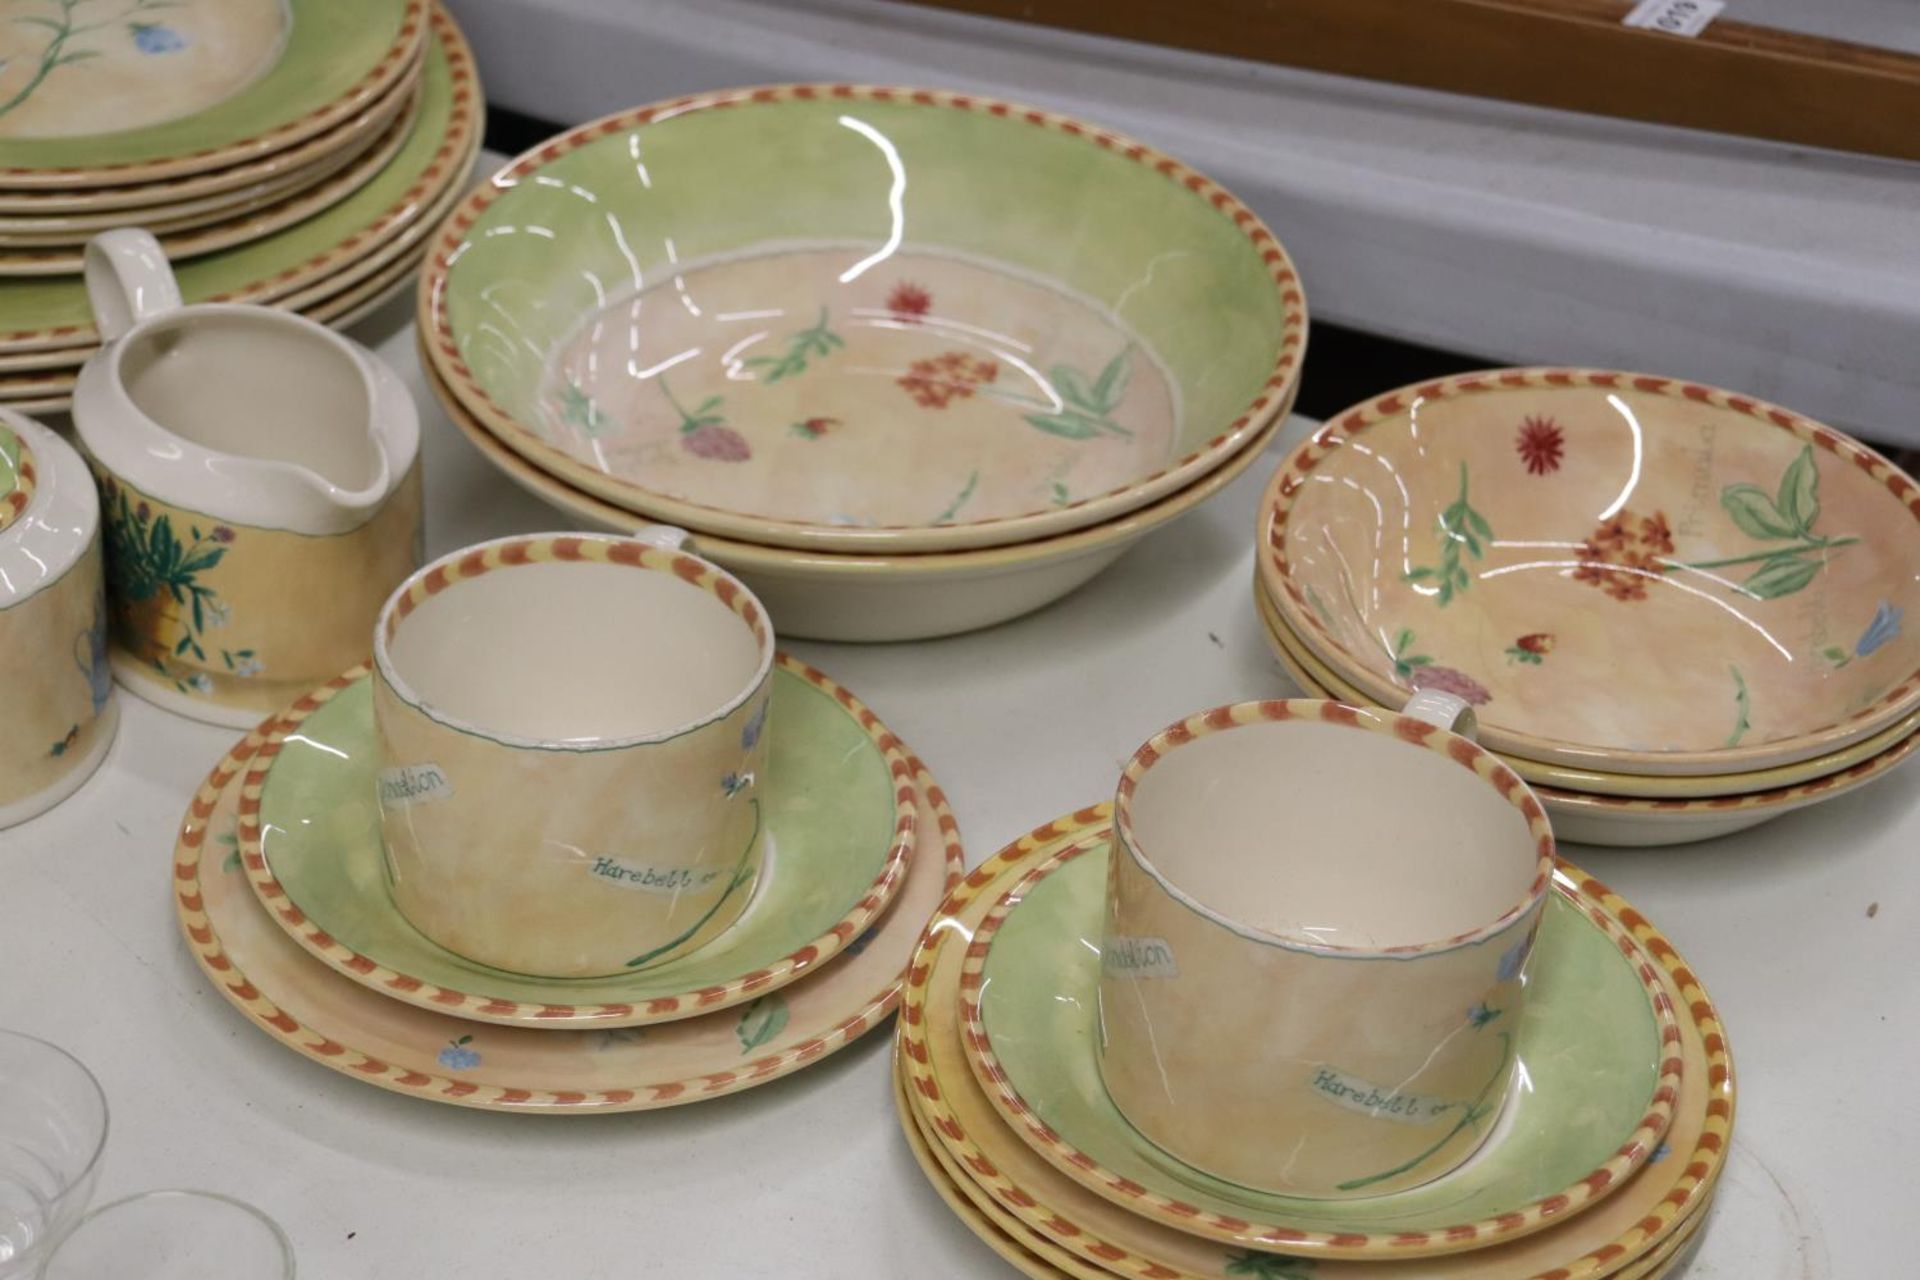 A PART DINNER SERVICE TO INCLUDE PLATES, LARGE BOWLS, DESSERT BOWLS, A TEAPOT, SUGAR BOWL, CREAM - Image 5 of 6